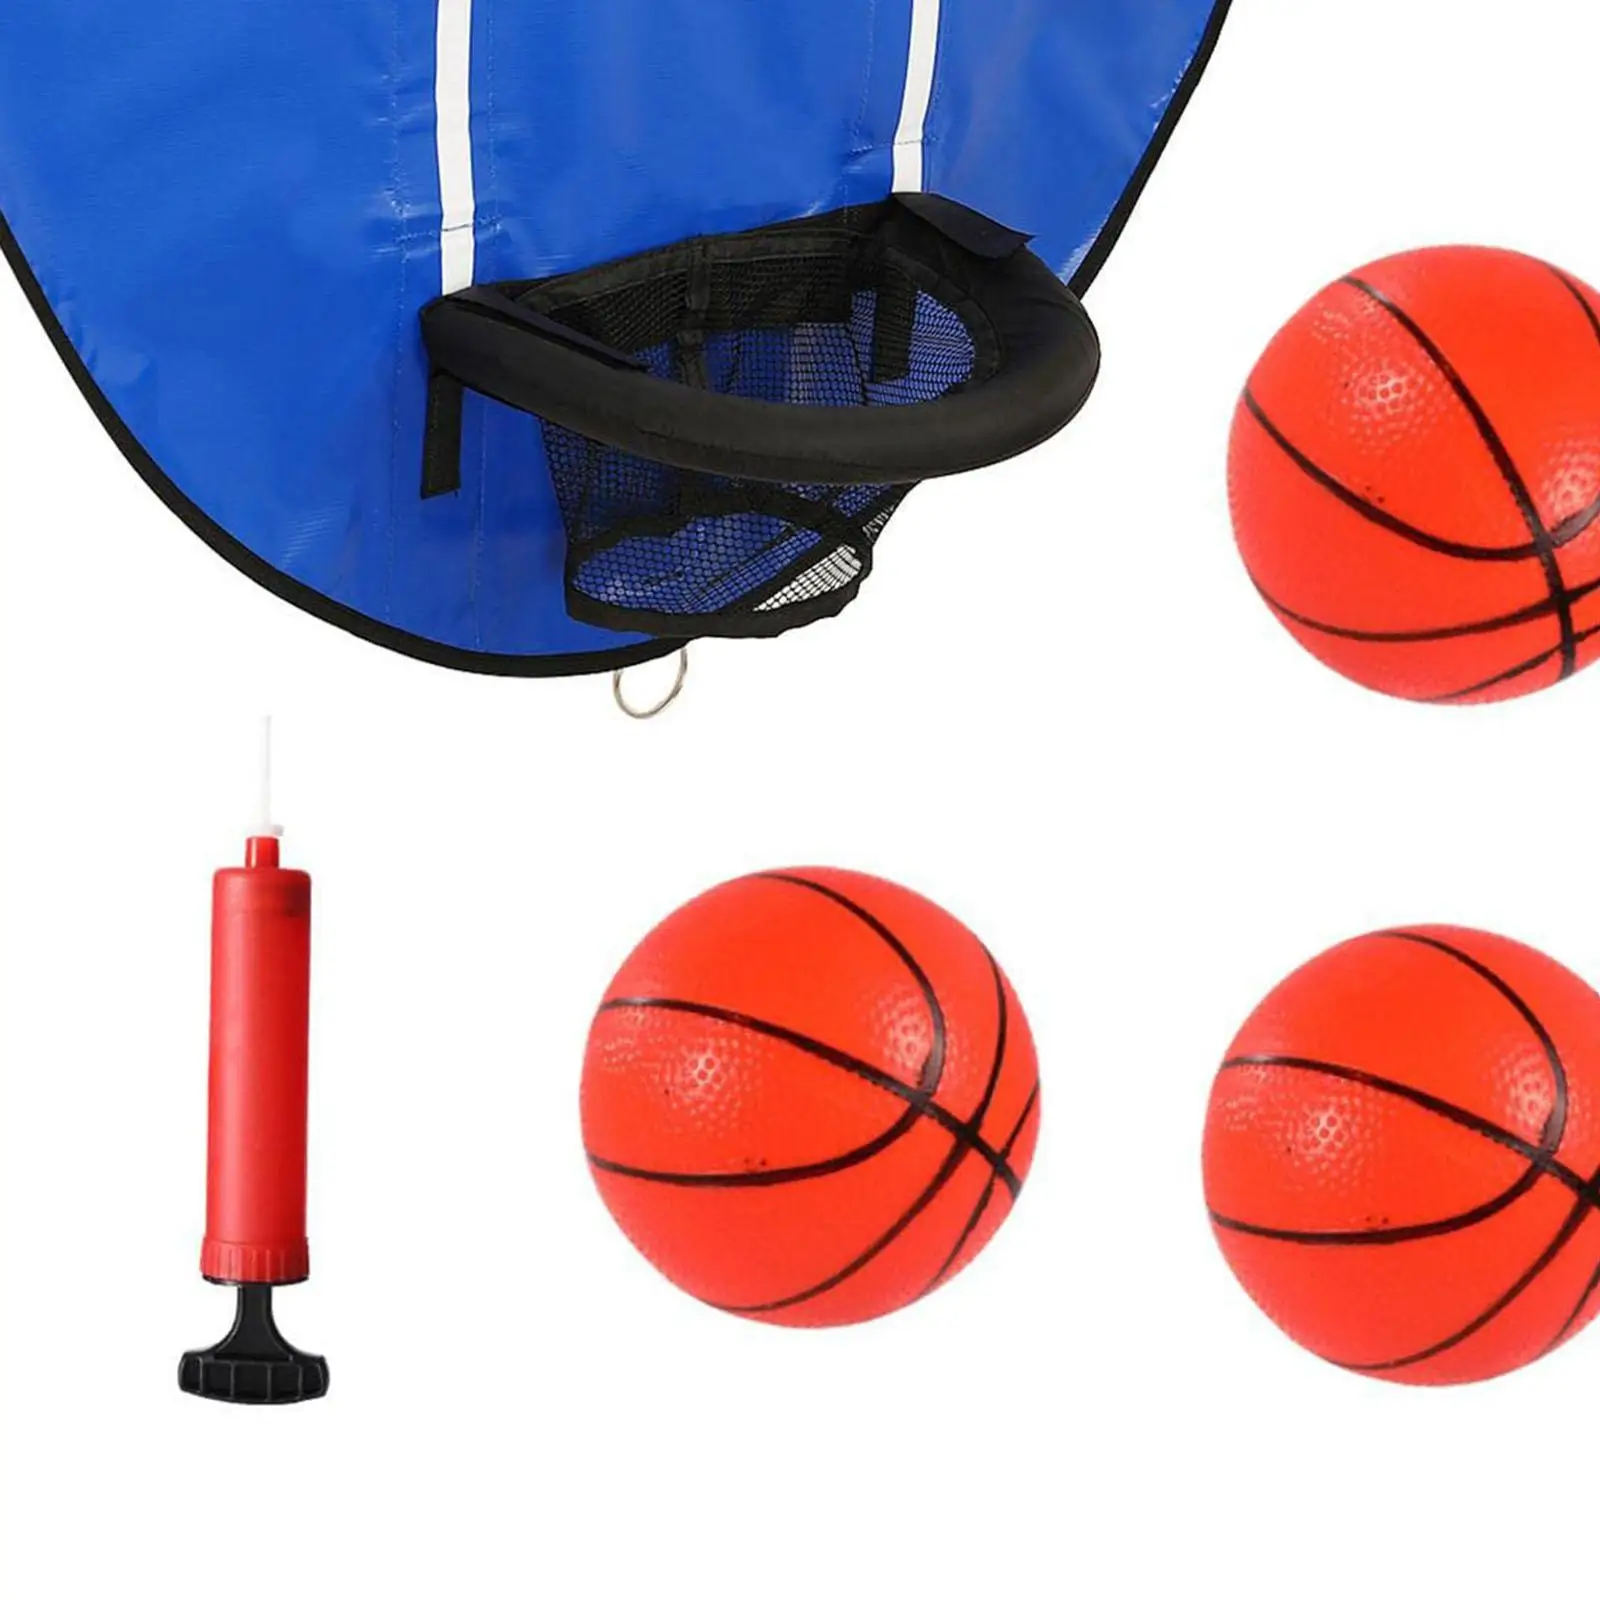 Mini Trampoline Basketball Hoop with Ball, Pump Goal Game Waterproof Materials Breakaway Rim for Safety Dunking Basketball Frame